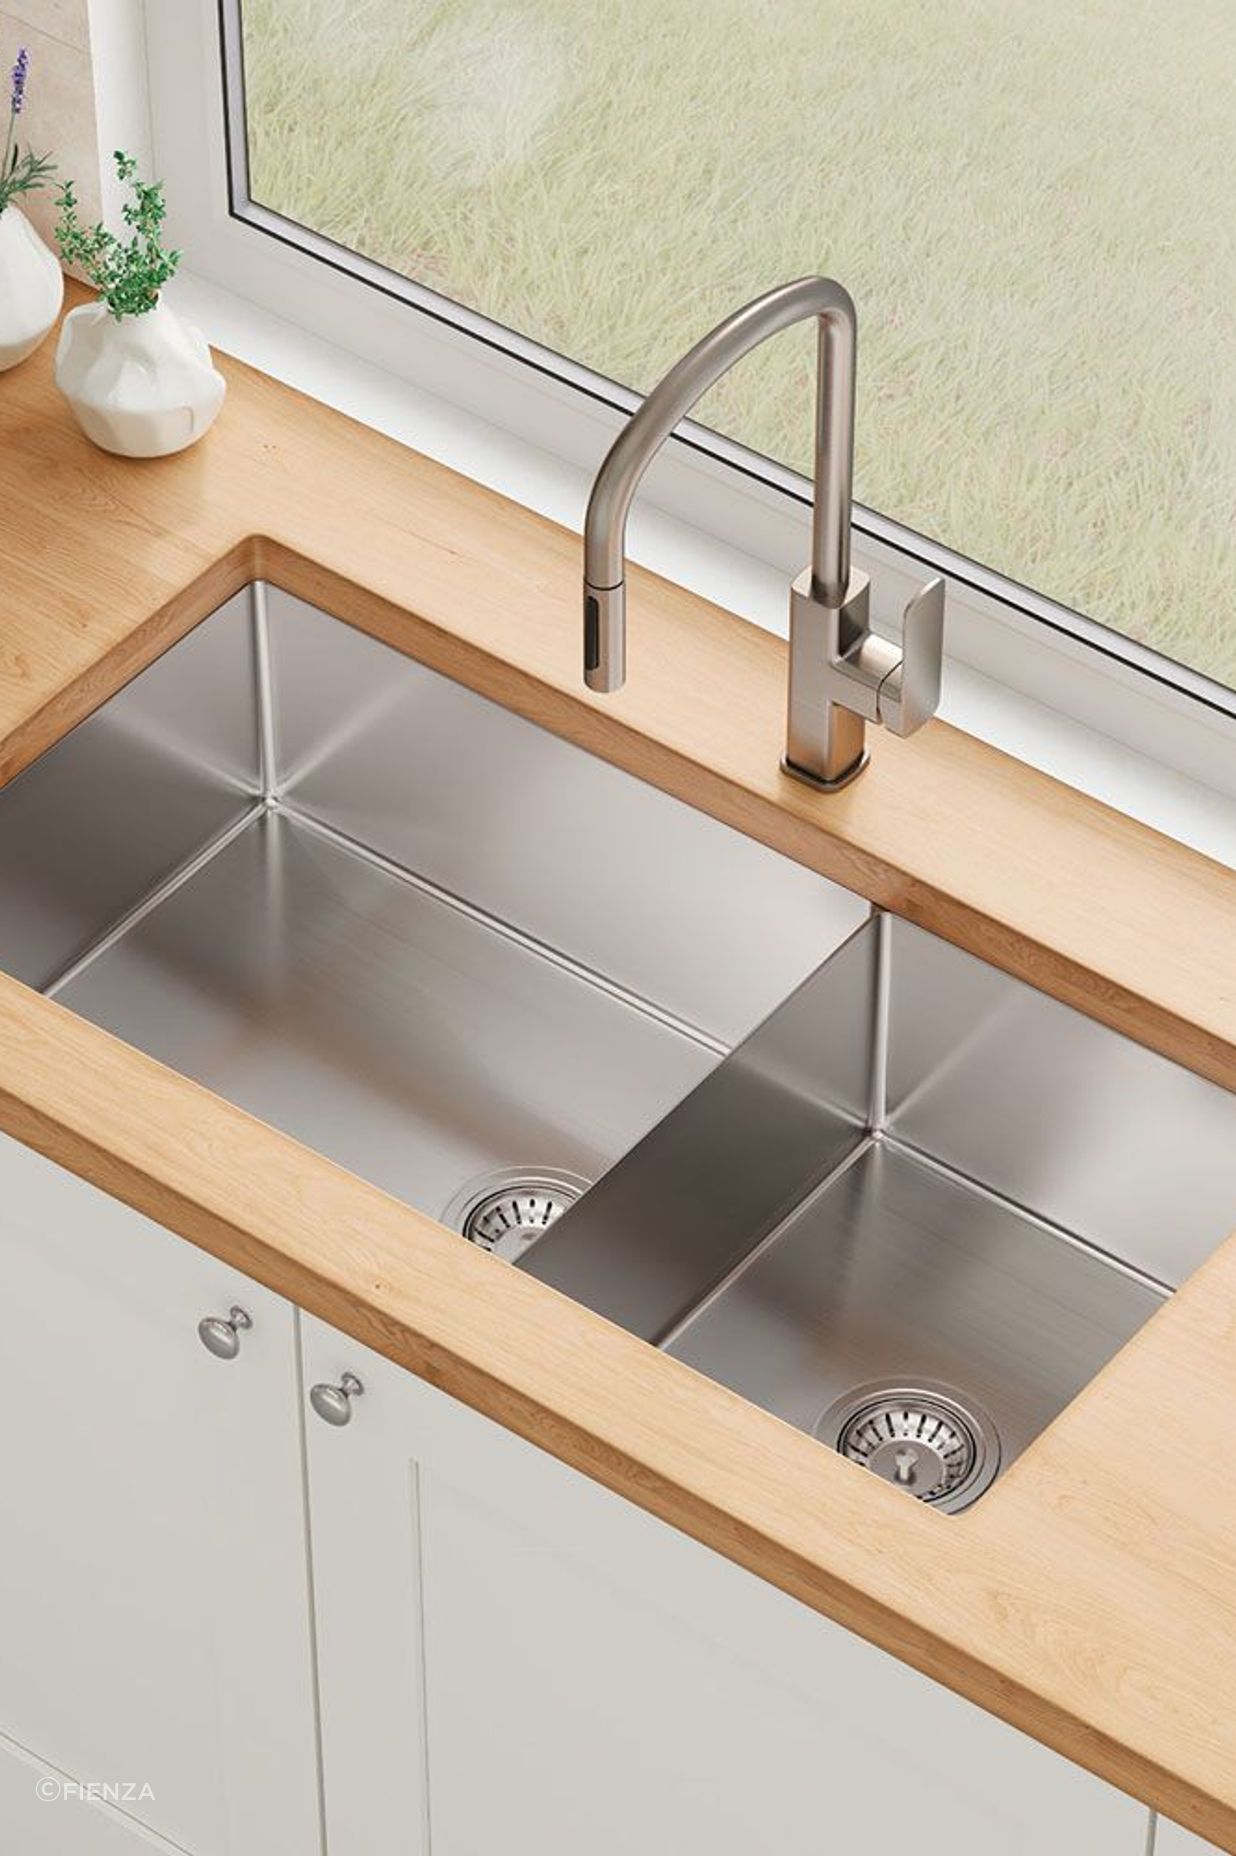 Double bowl sinks offer separate areas for washing and rinsing.